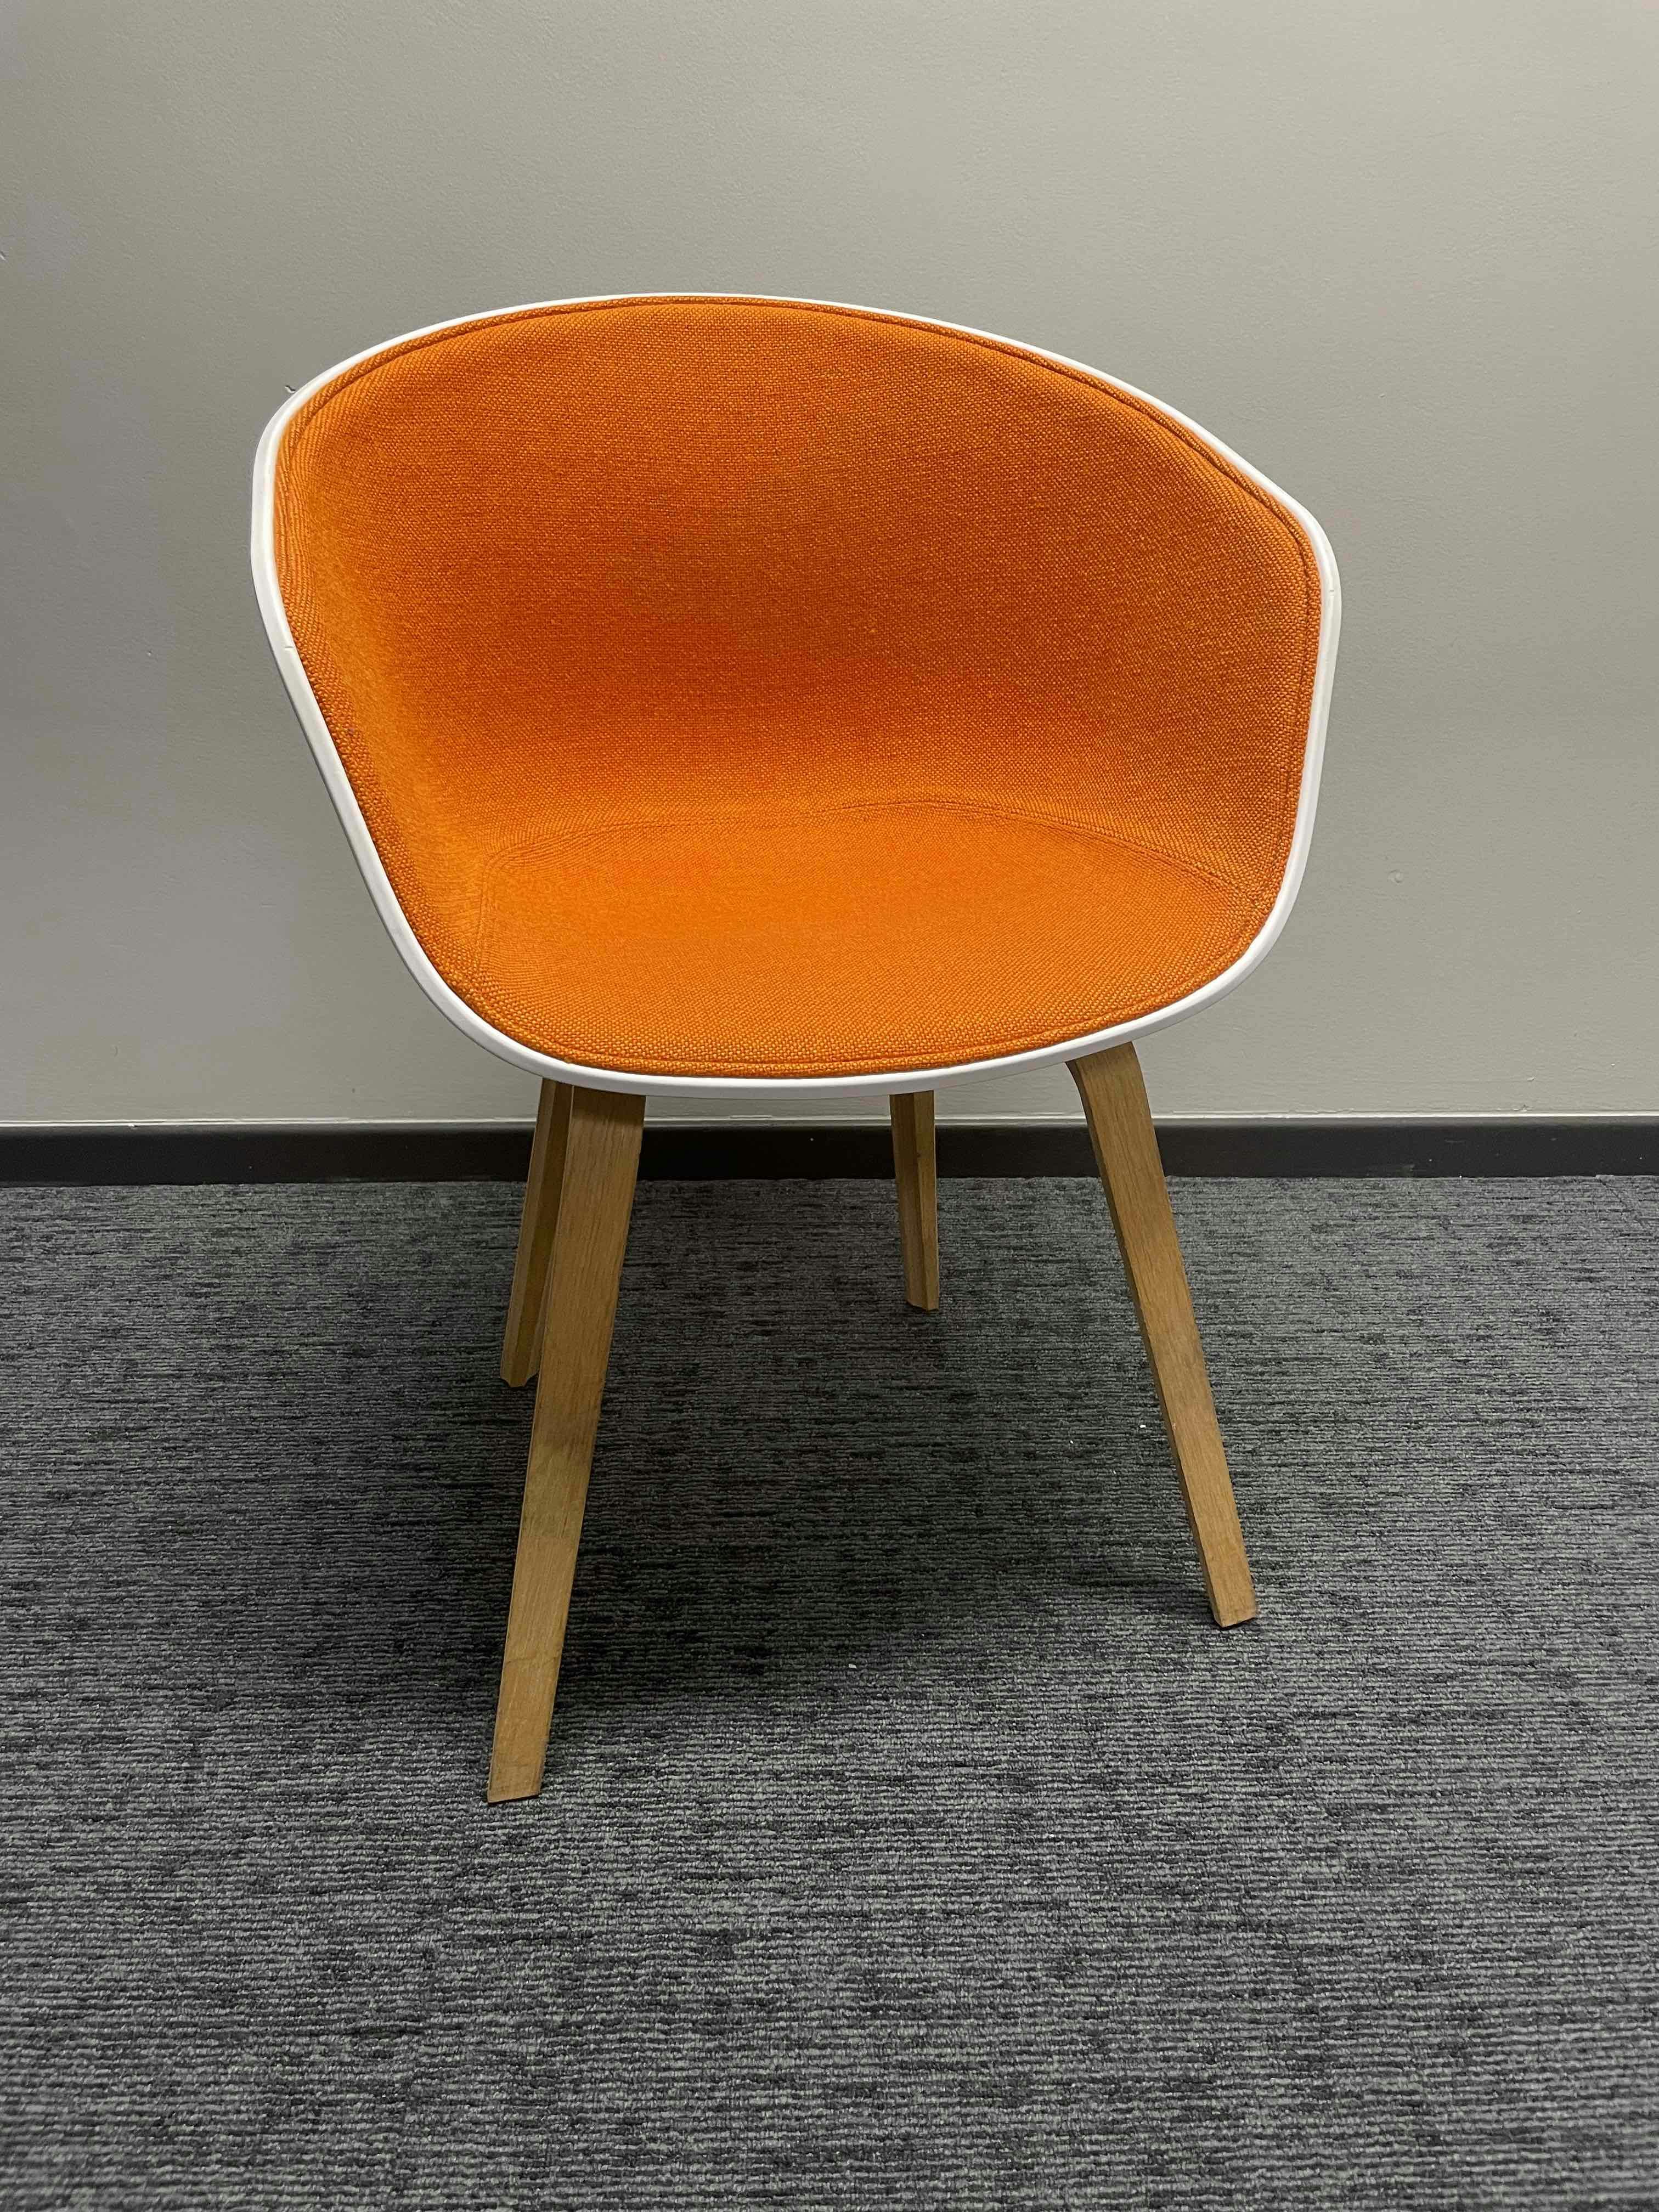 HAY Orange and white chairs - Relieve Furniture